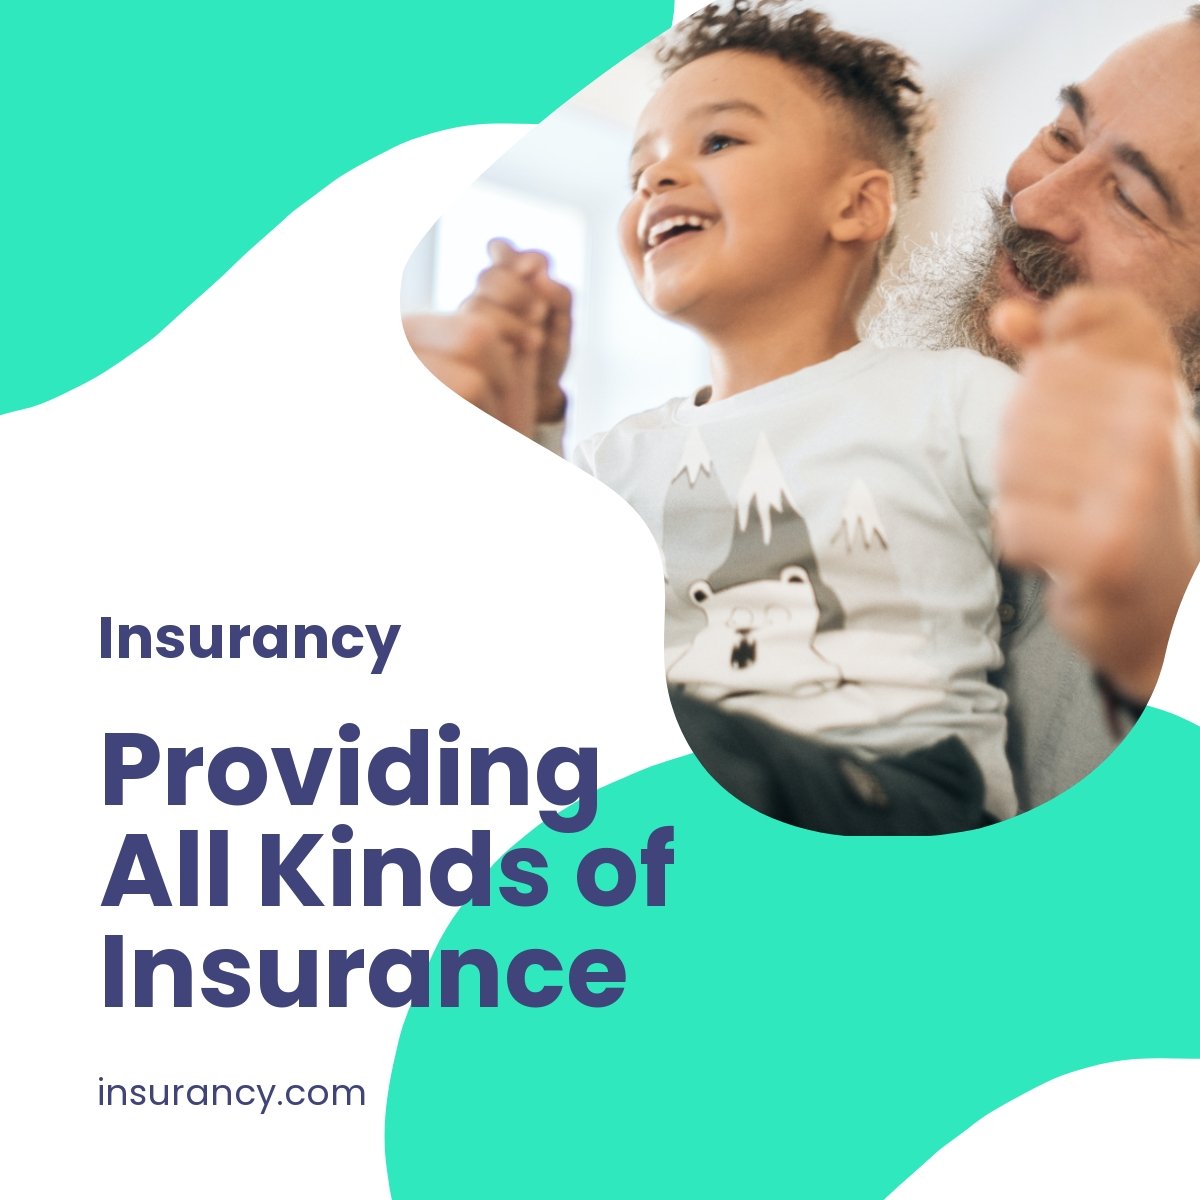 FREE Insurance Agency Post Template Download in JPG PNG Template net